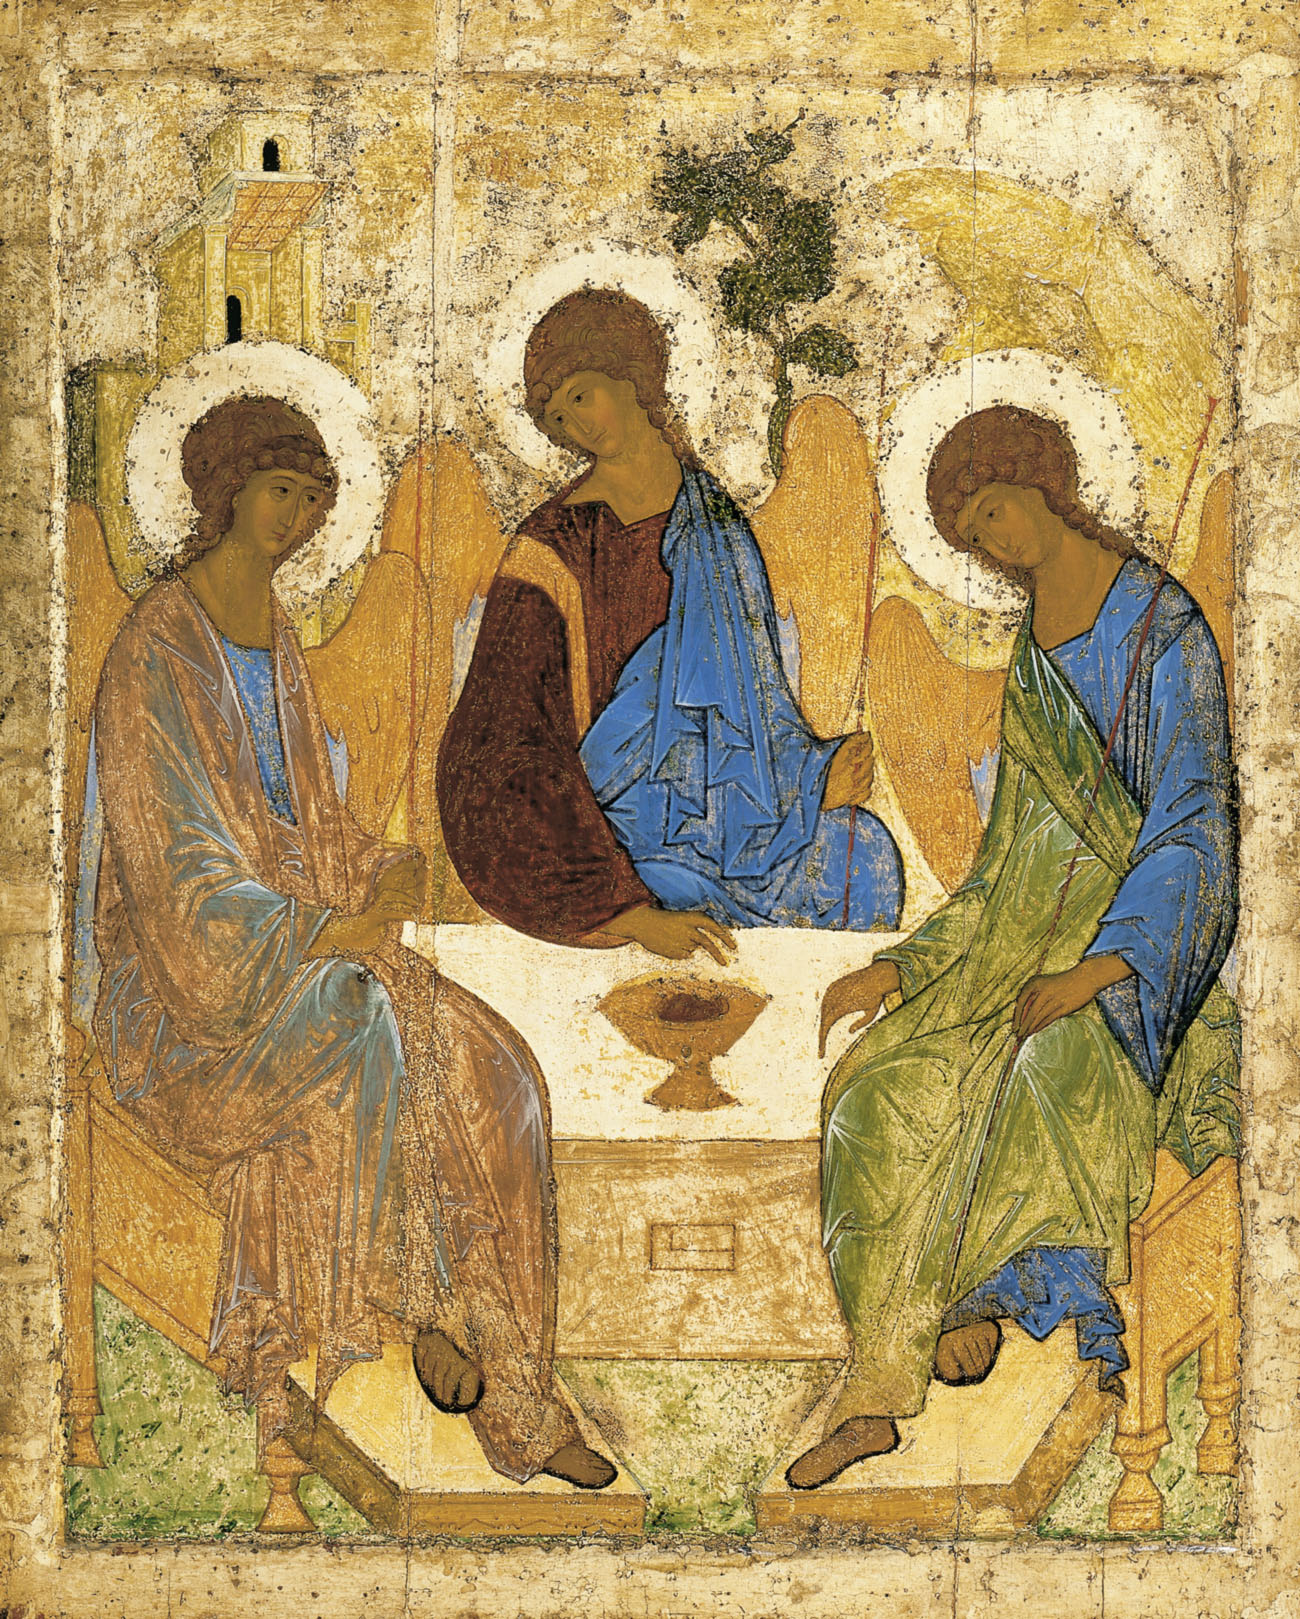 The Trinity (Russian: Троица, tr. Troitsa, also called The Hospitality of Abraham) is an icon created by a Russian painter Andrei Rublev in the 15th century.